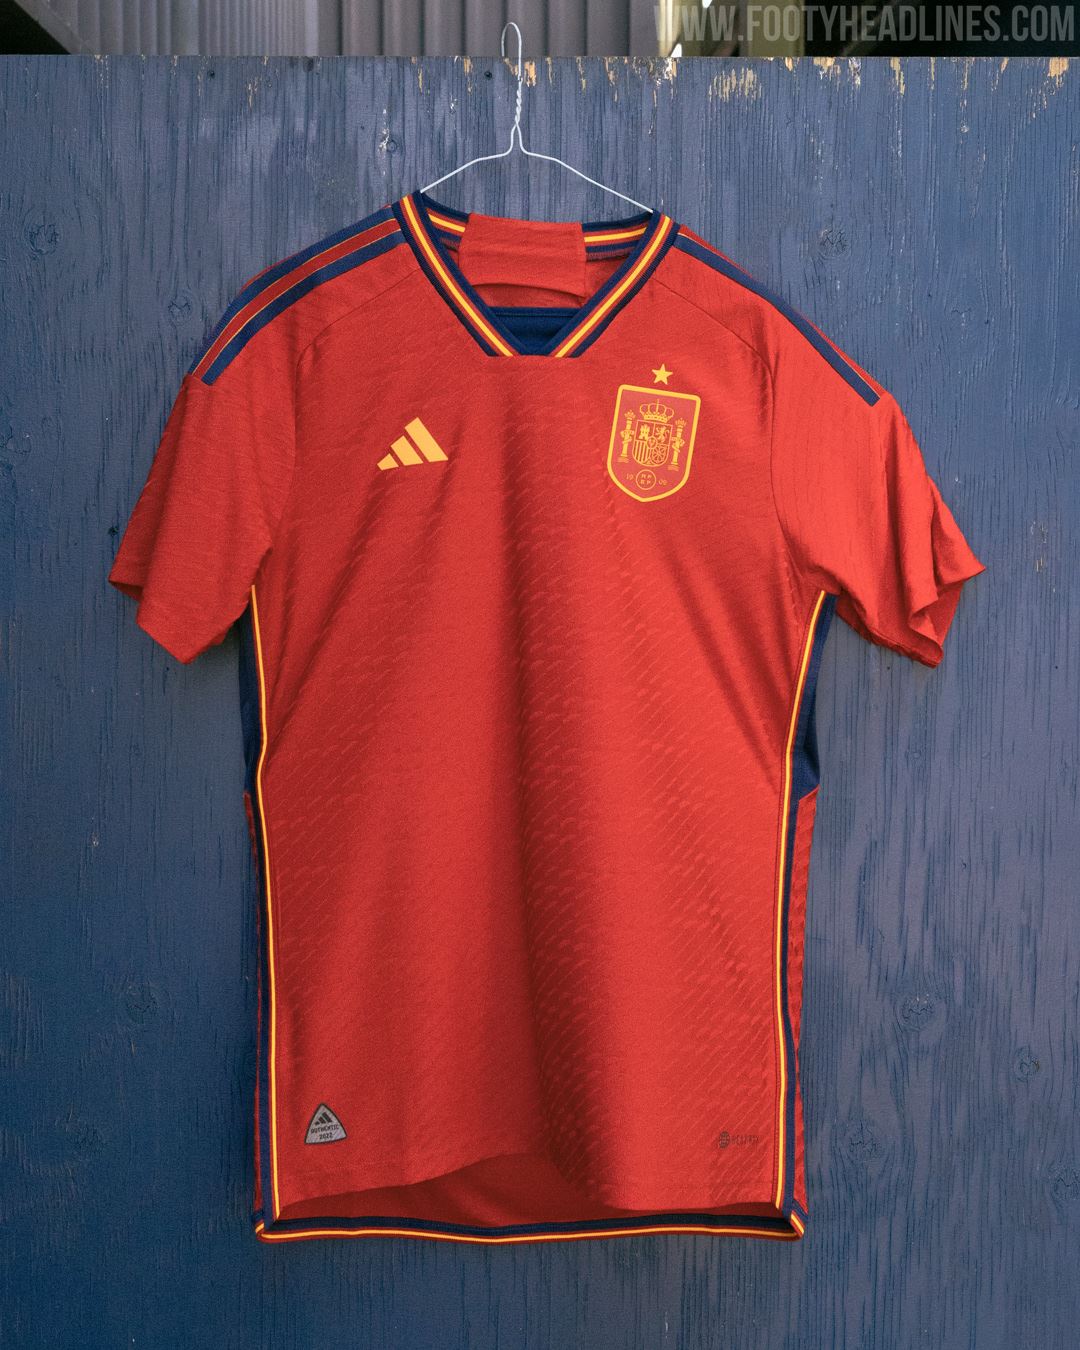 spain jersey today